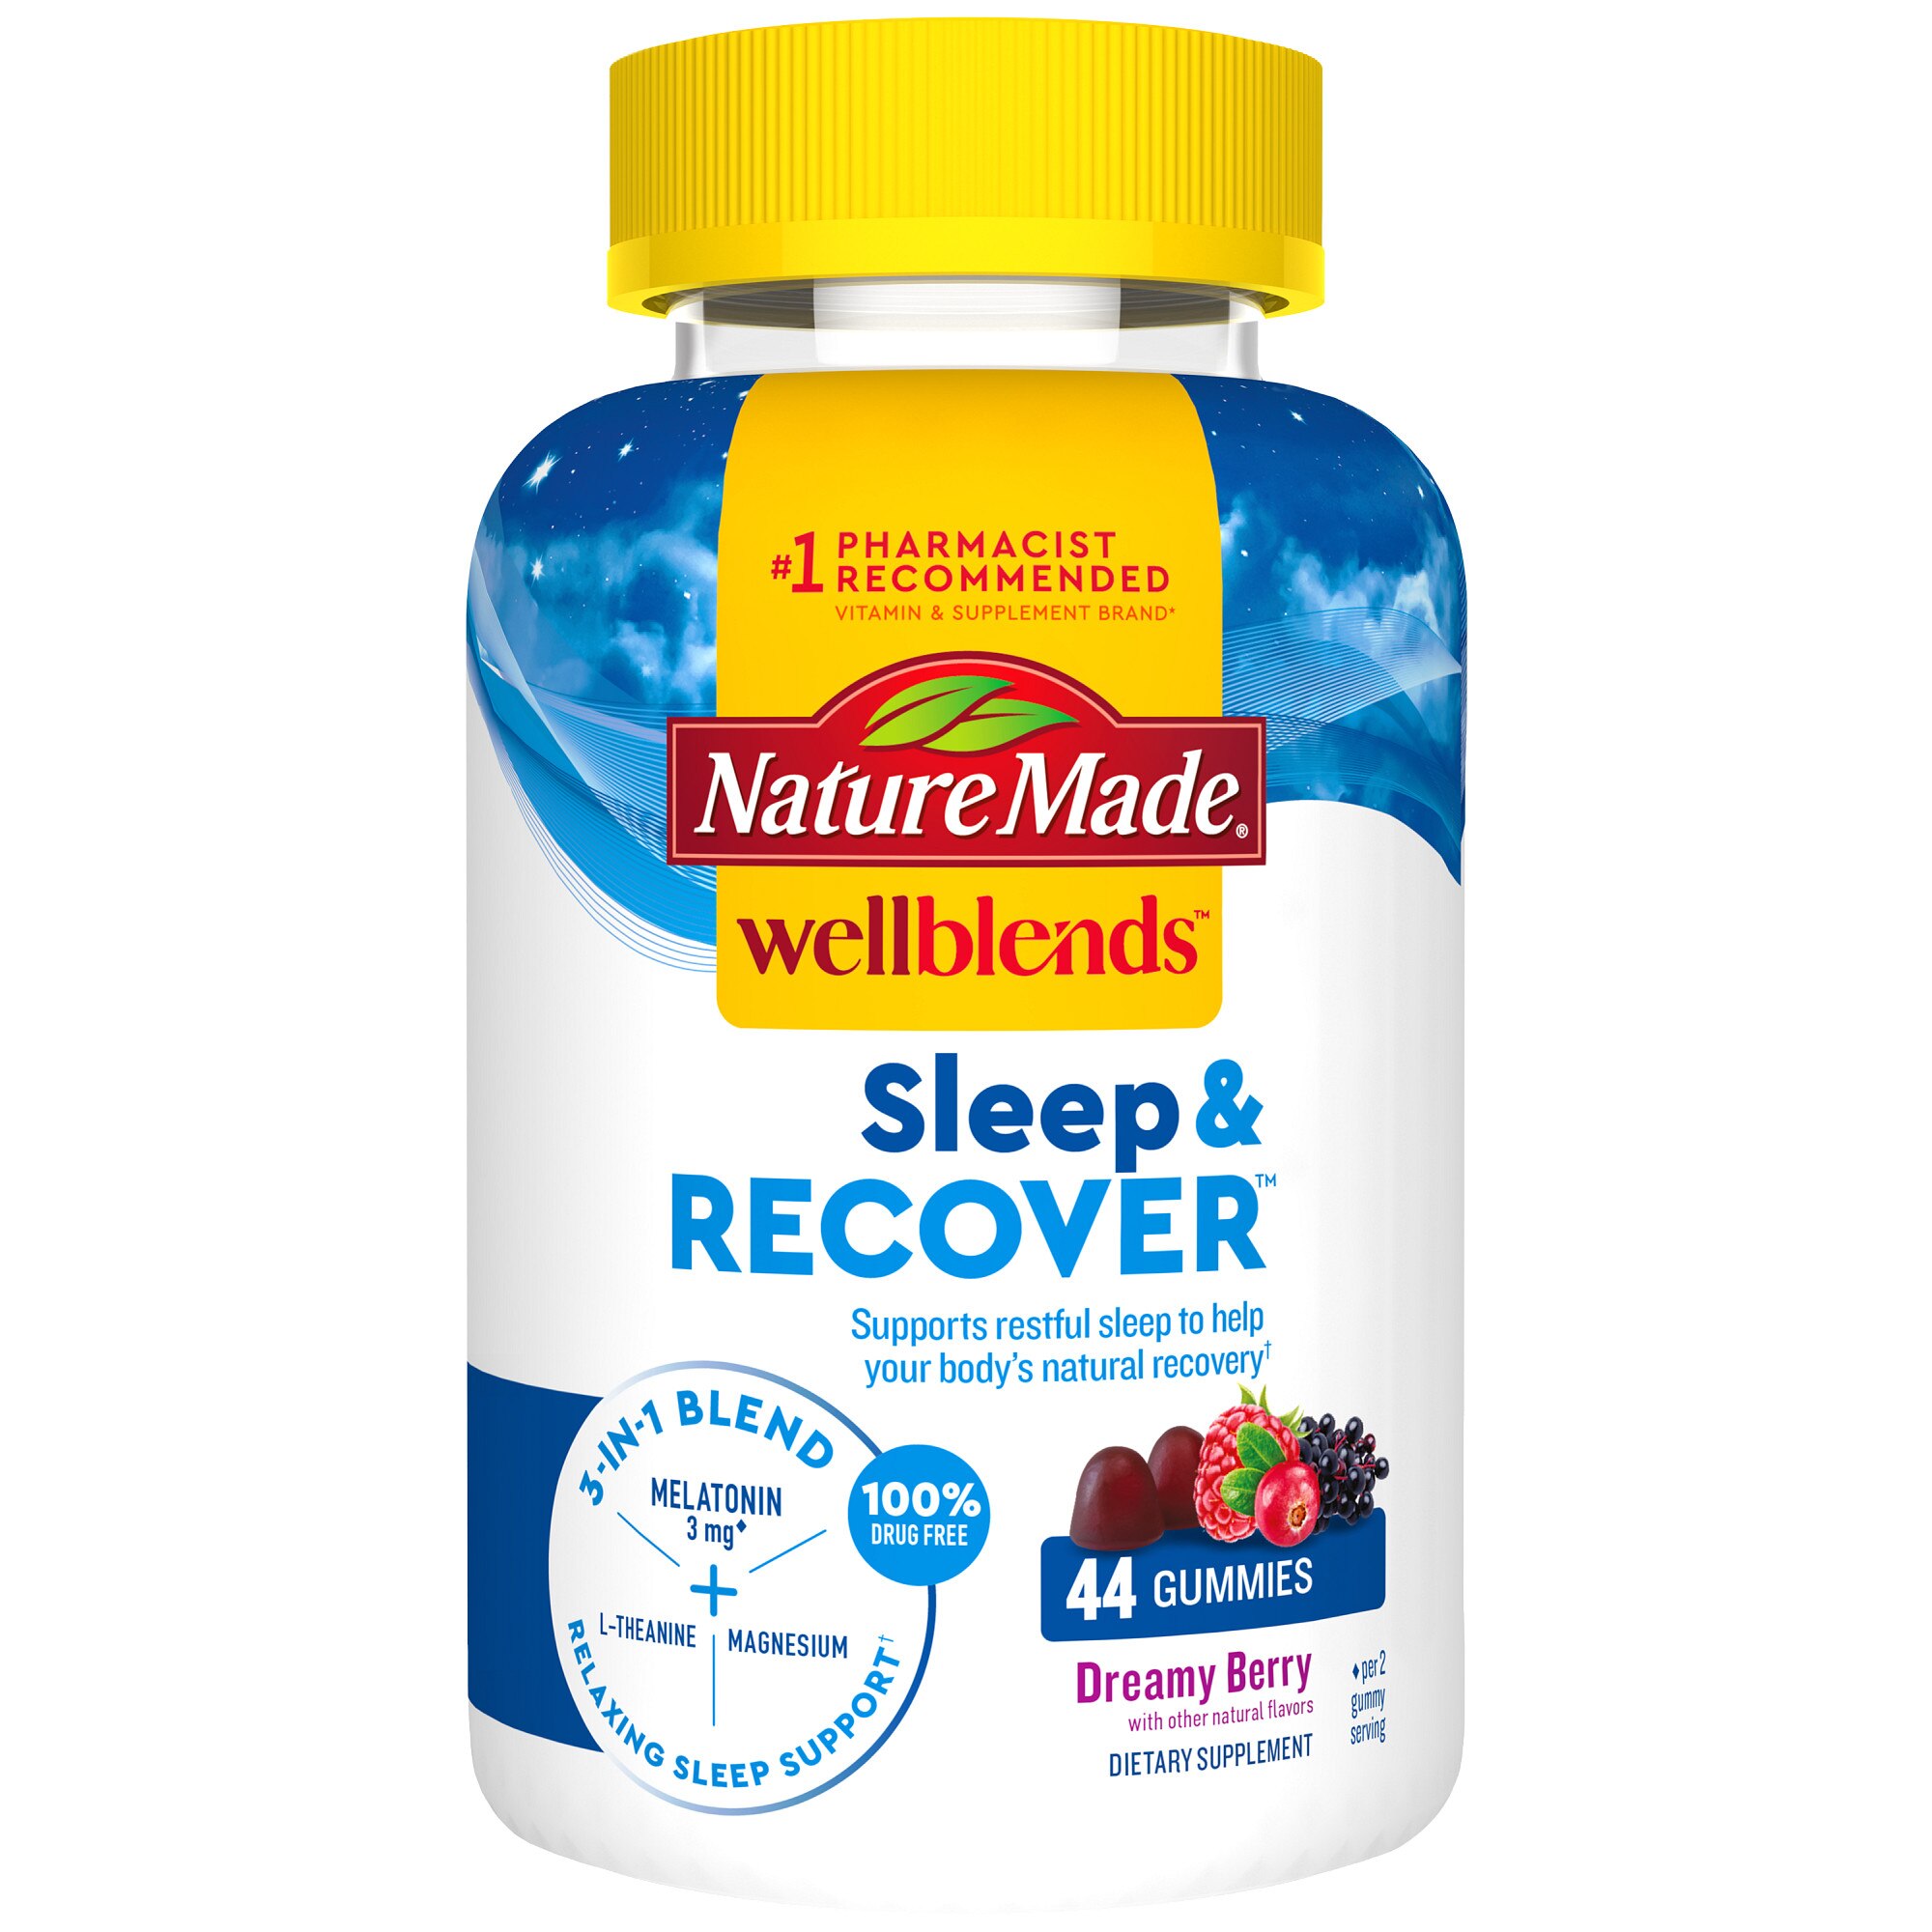 Nature Made Wellblends Sleep and Recover Gummies, 44 CT